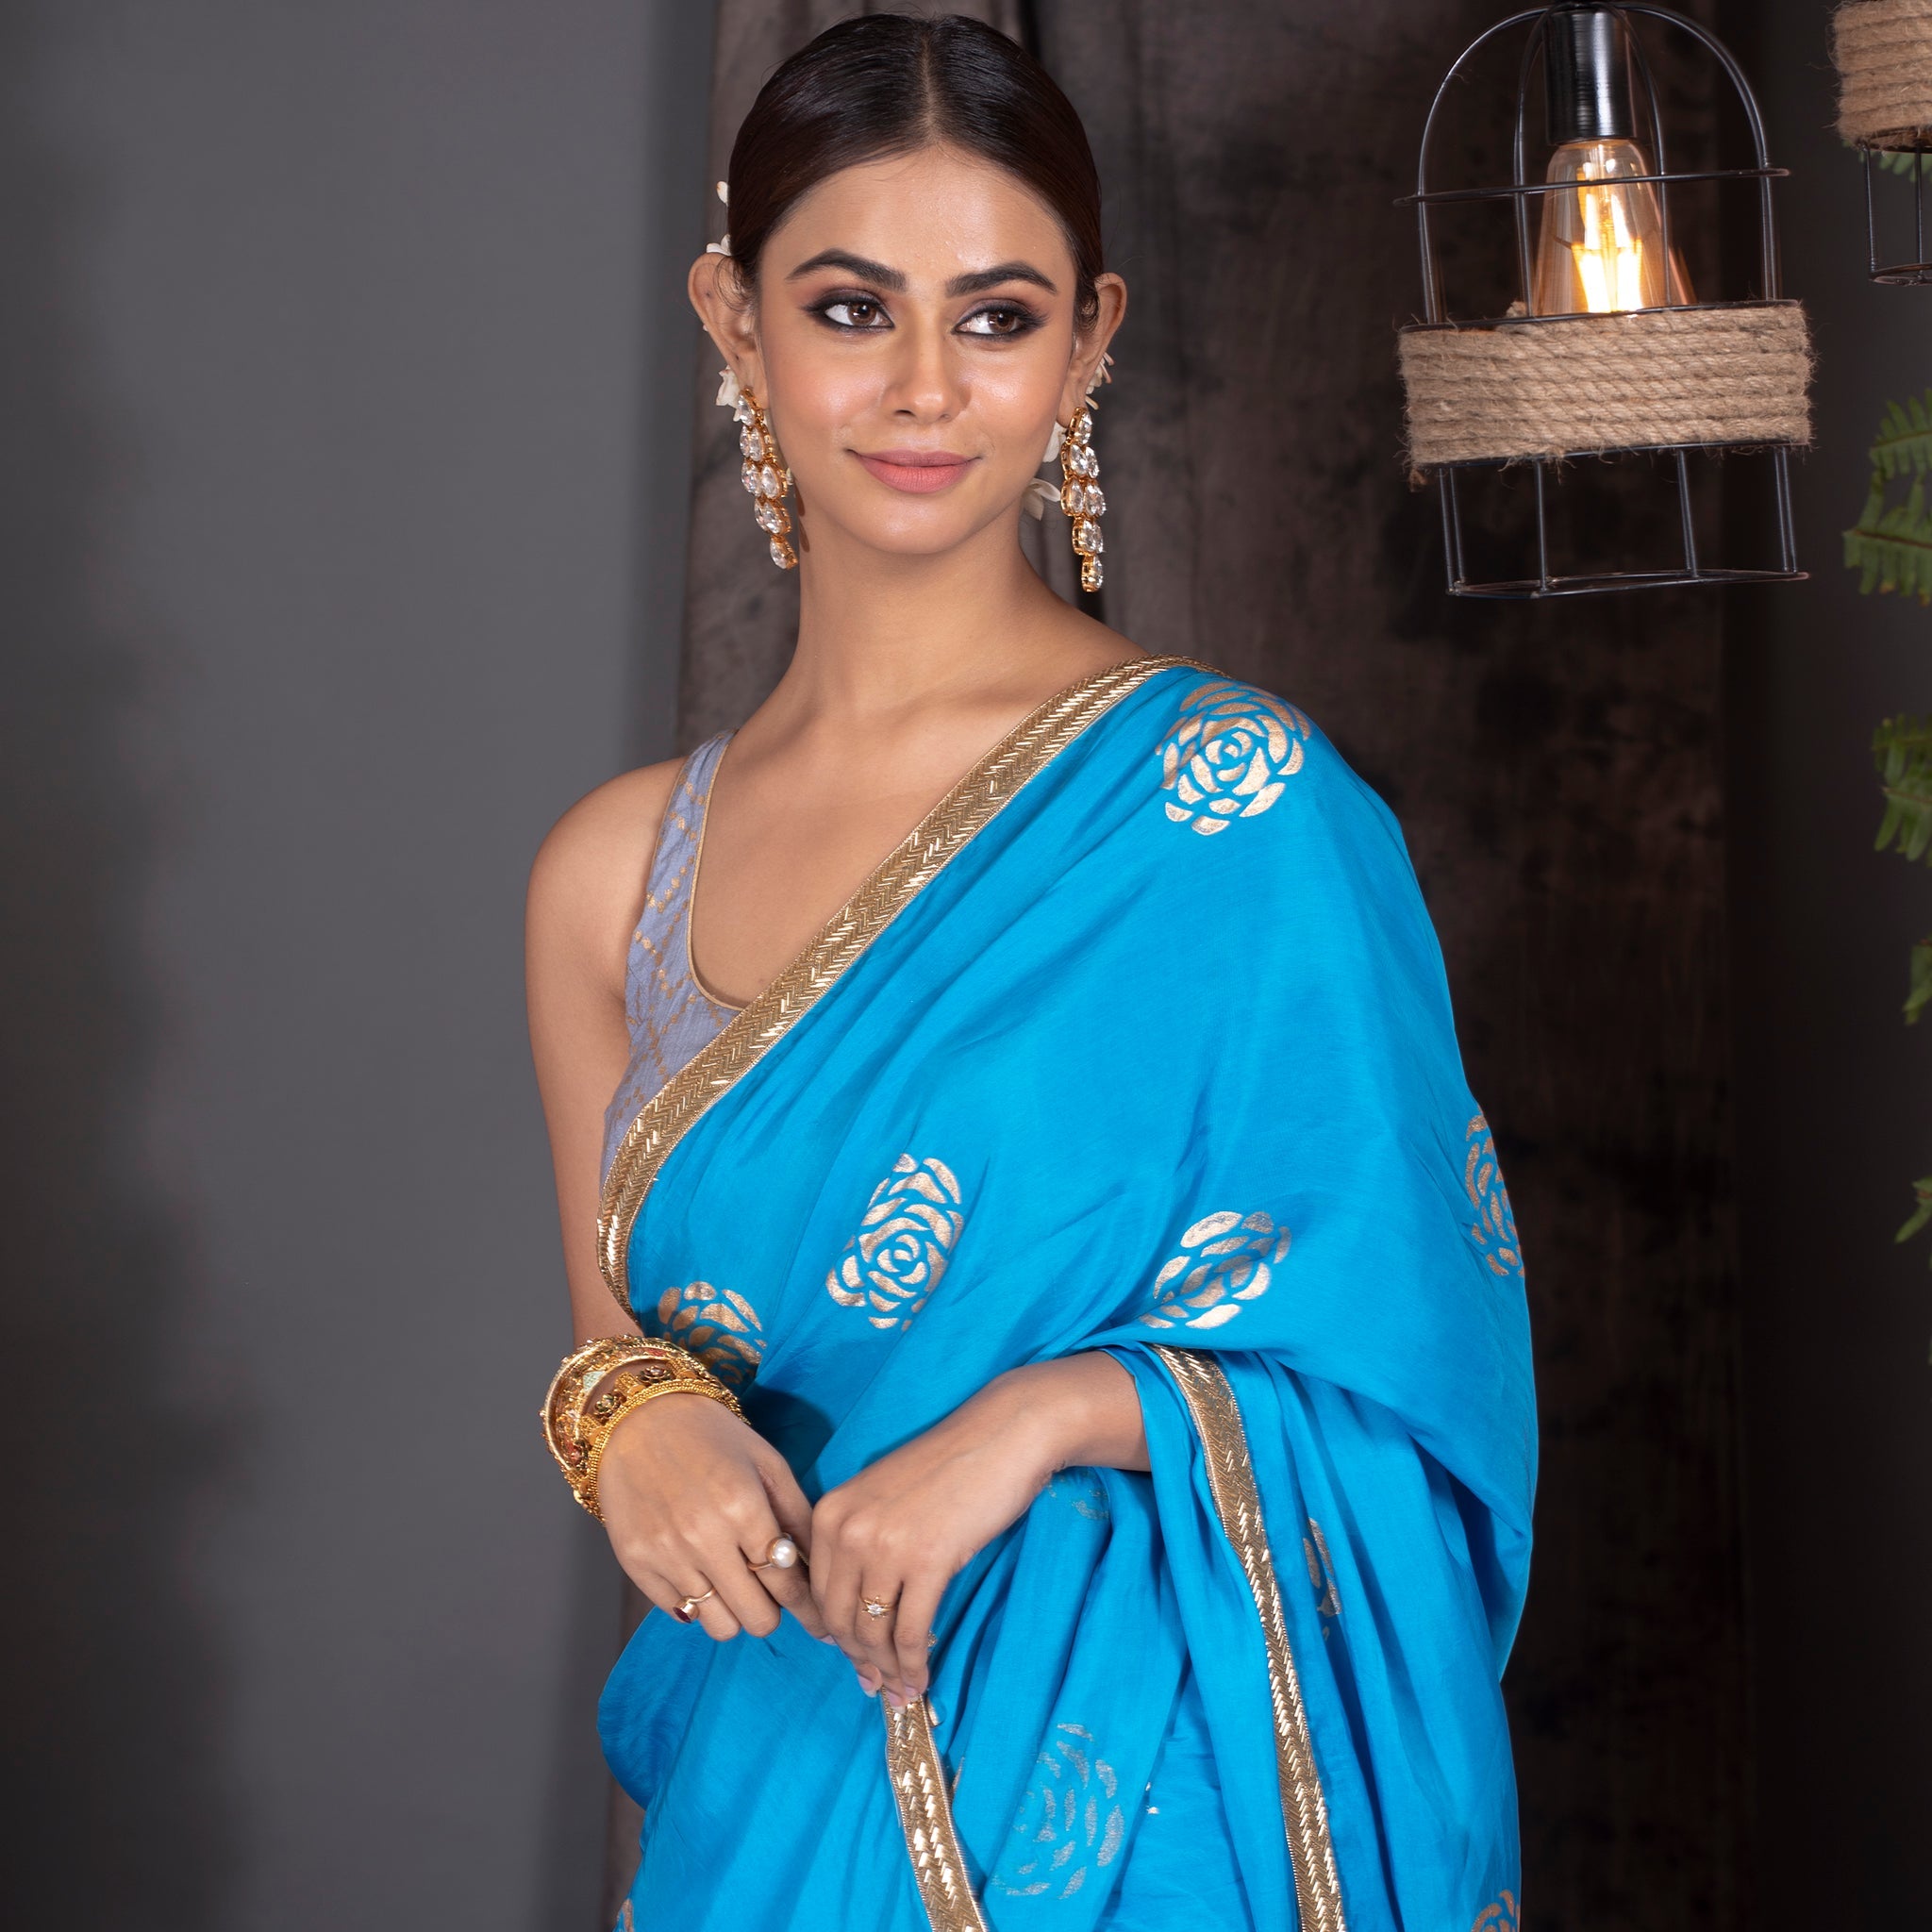 Women's Cerulean Blue Habutai Silk Saree With Gold Print And Hand Embroidered Lace Border - Boveee